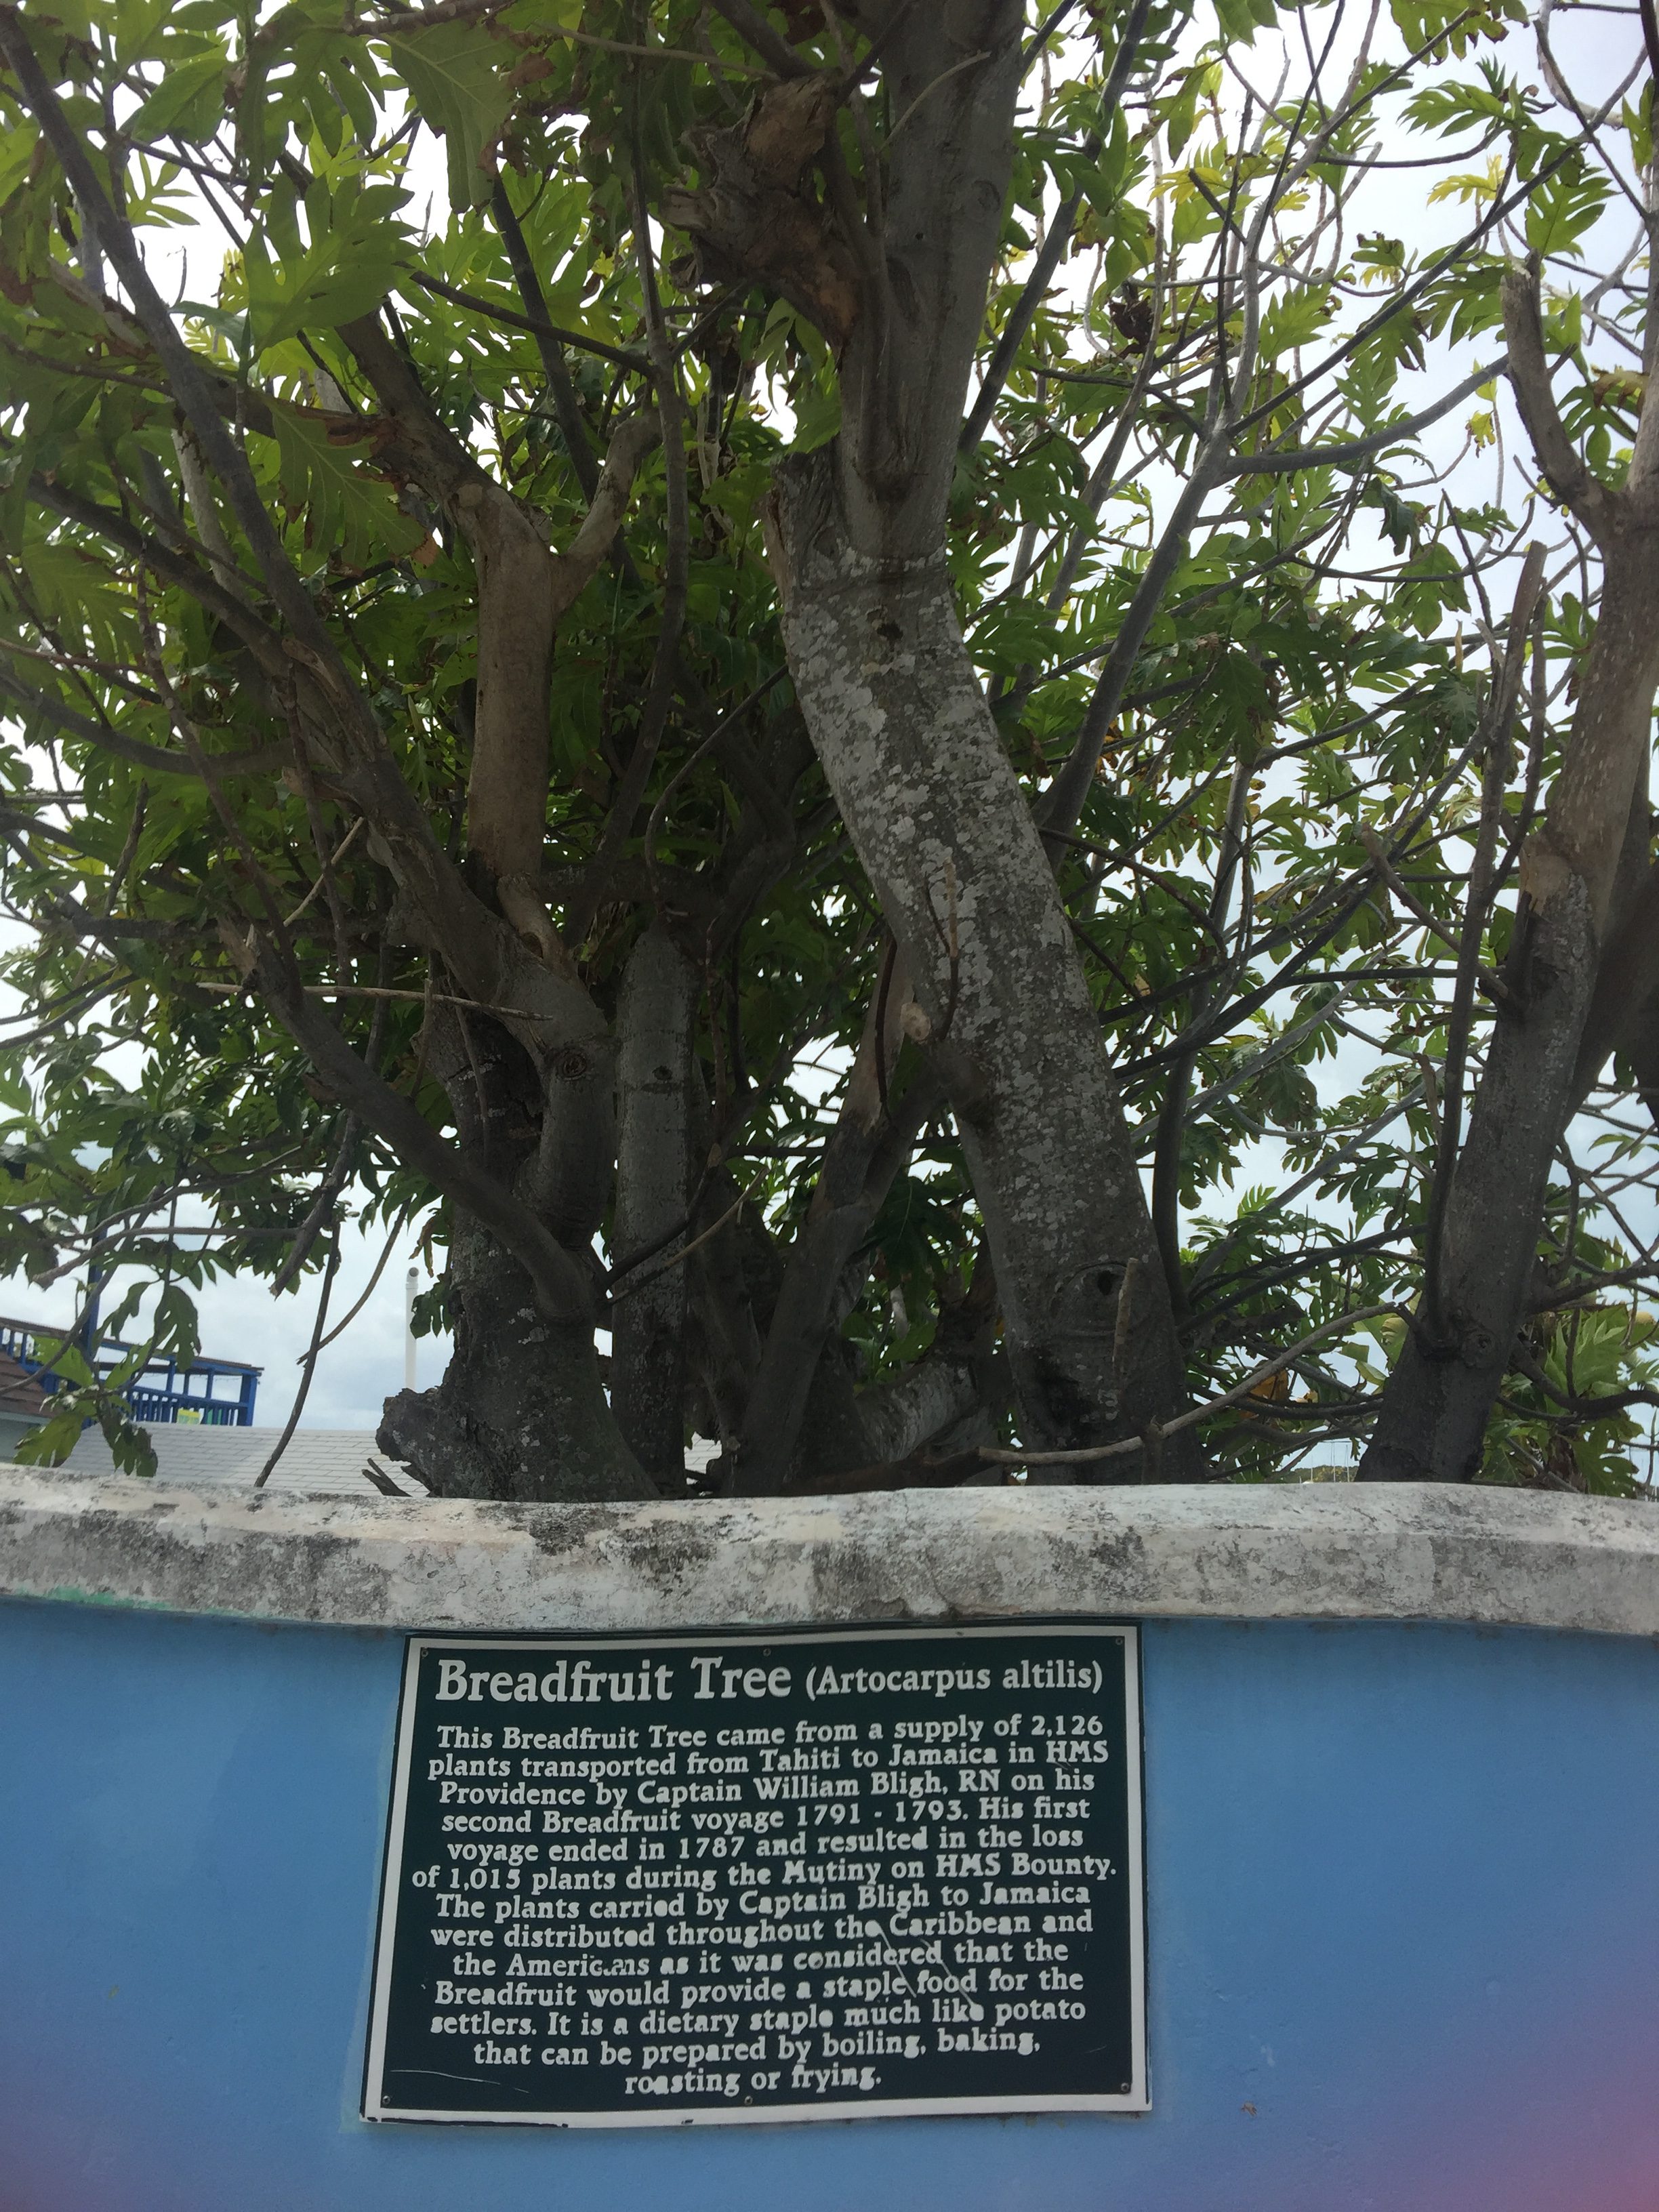 A breadfruit tree, a descendent of those bought to the Caribbean by Captain Bligh on his second voyage, his first ending in the mutiny on the HMS Bounty